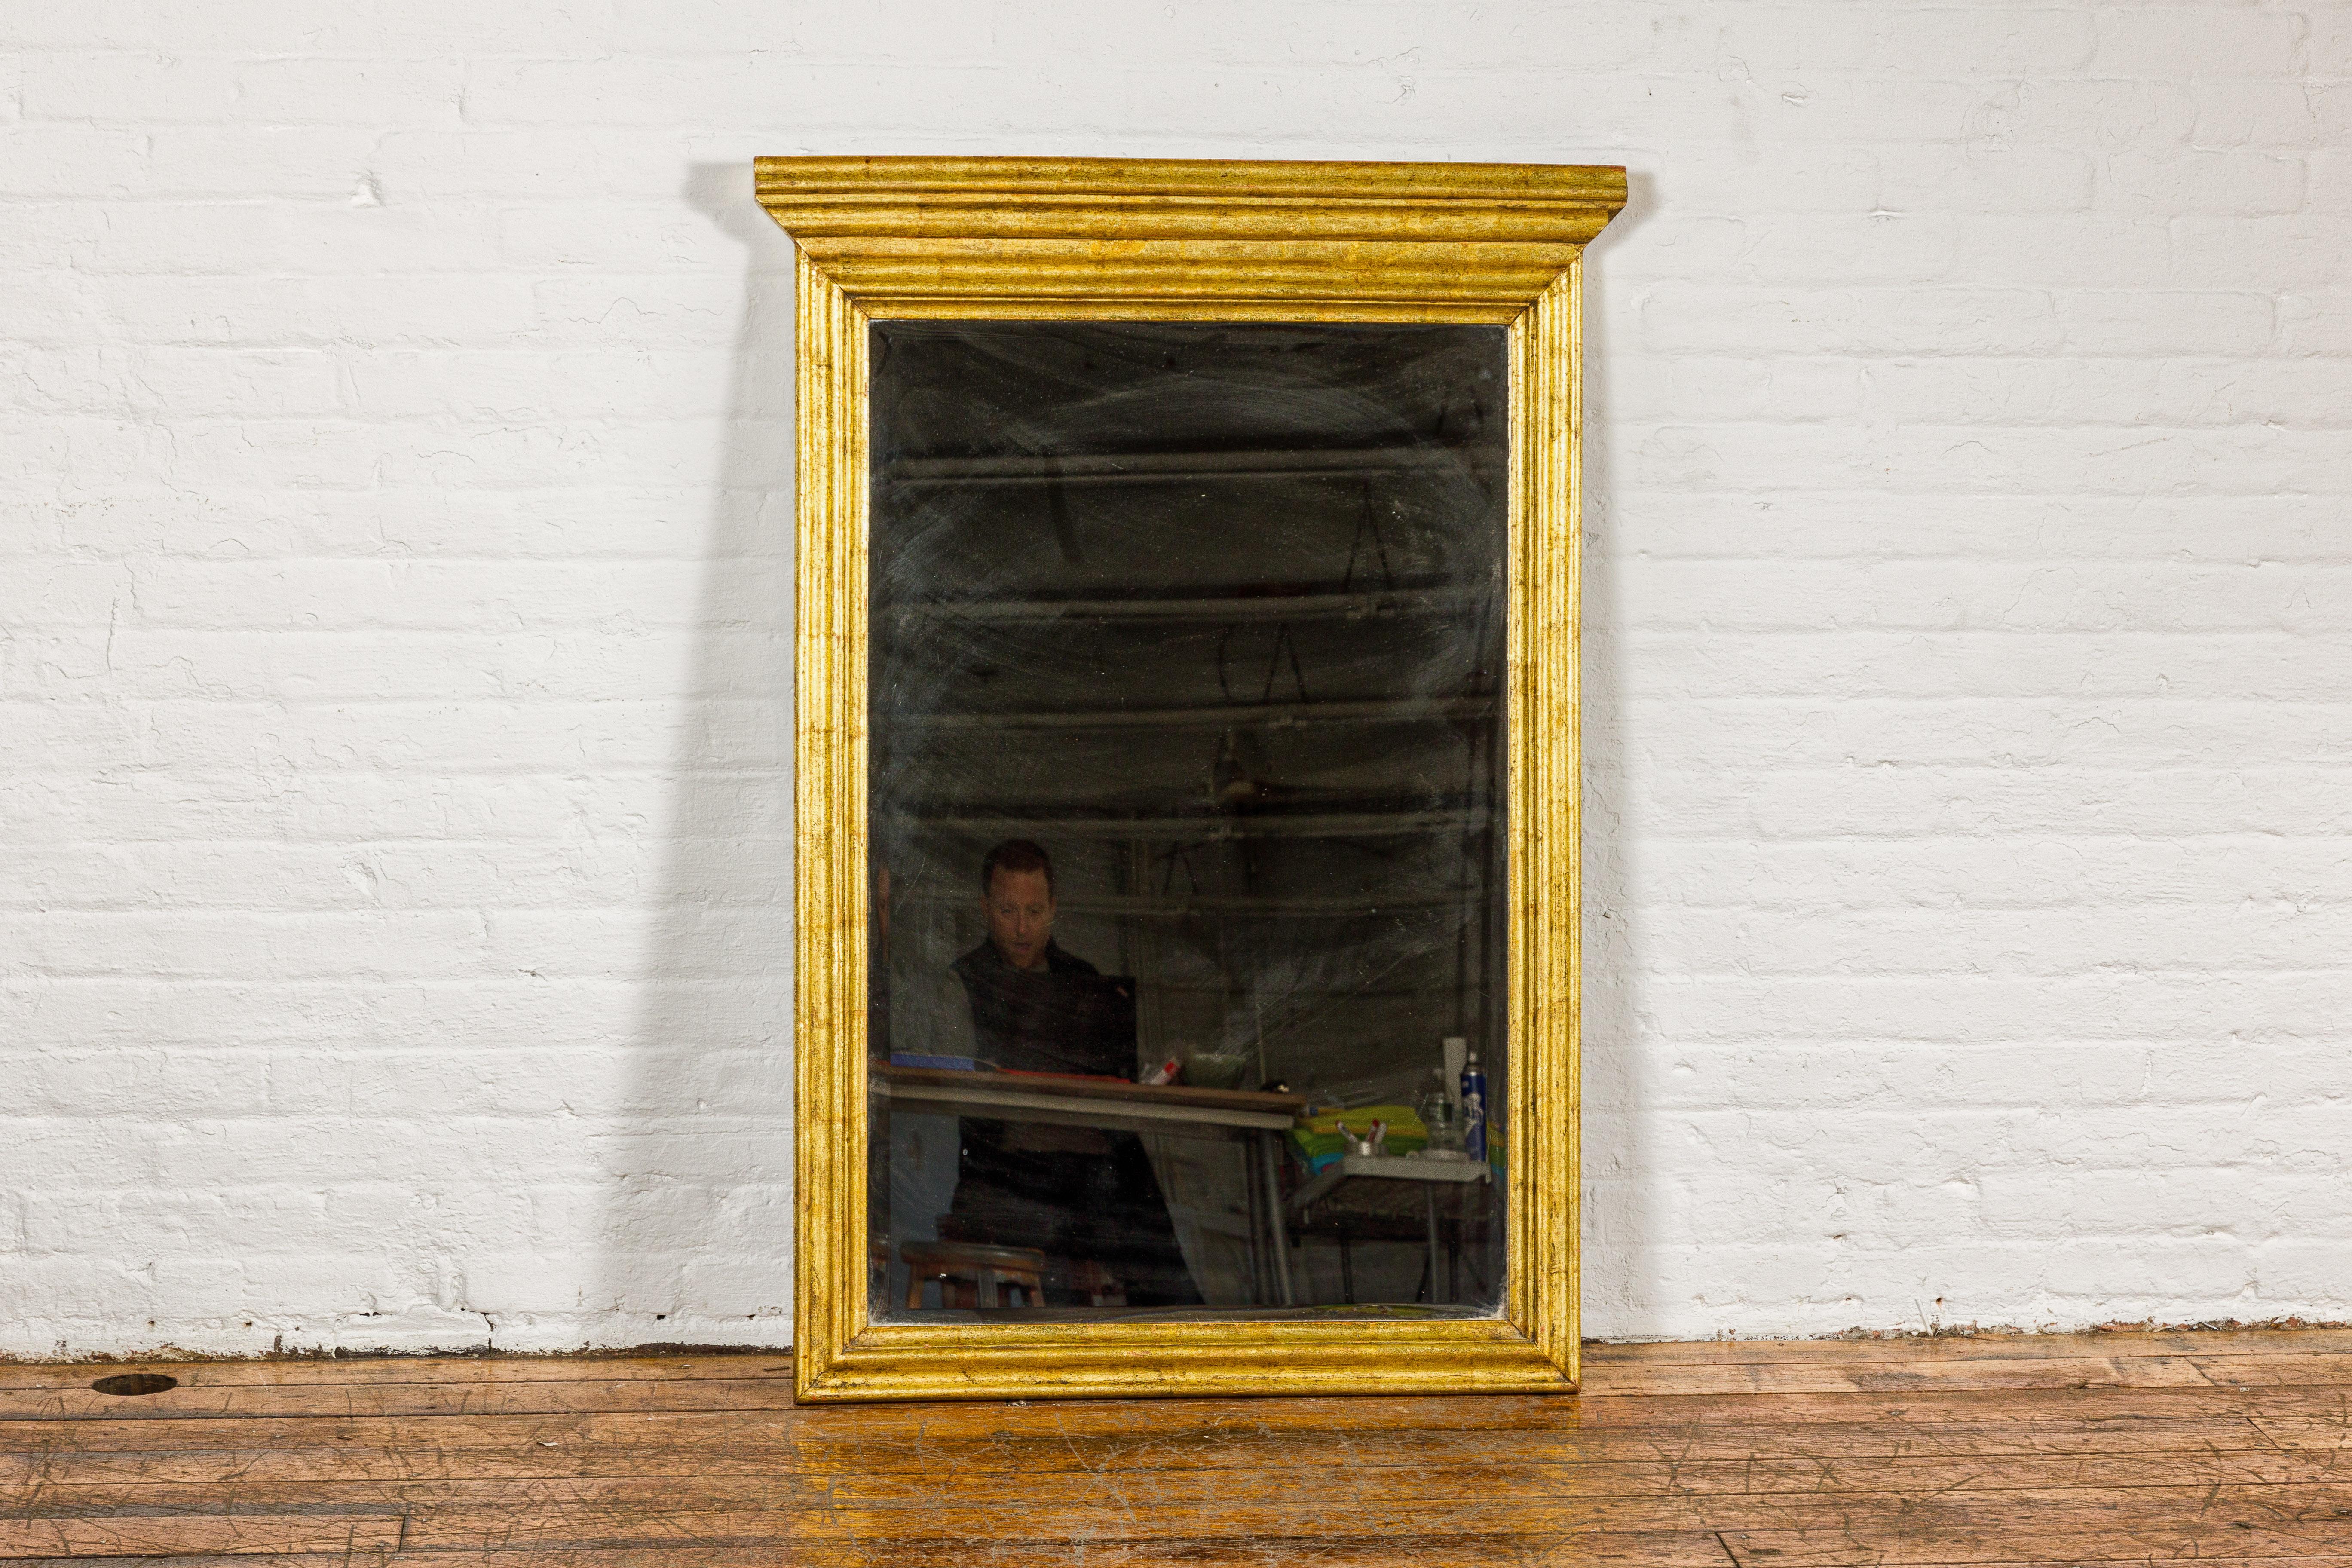 A Dutch Colonial gold leaf trumeau mirror with beveled glass and molded cornice. This Dutch Colonial trumeau mirror exudes an air of vintage elegance, with its radiant gold leaf frame offering a luxurious aura. The mirror itself boasts beveled